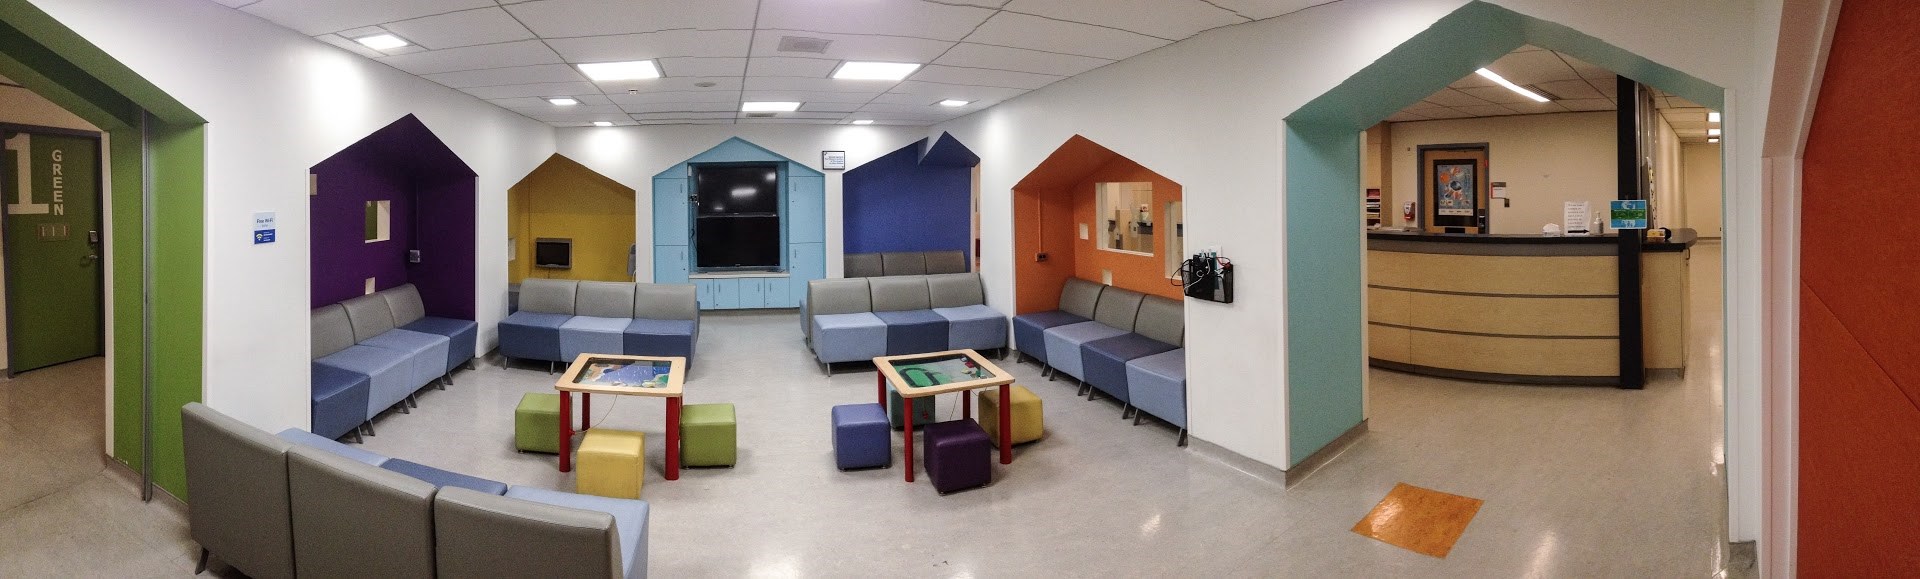 Department waiting room with colourful chairs and tables